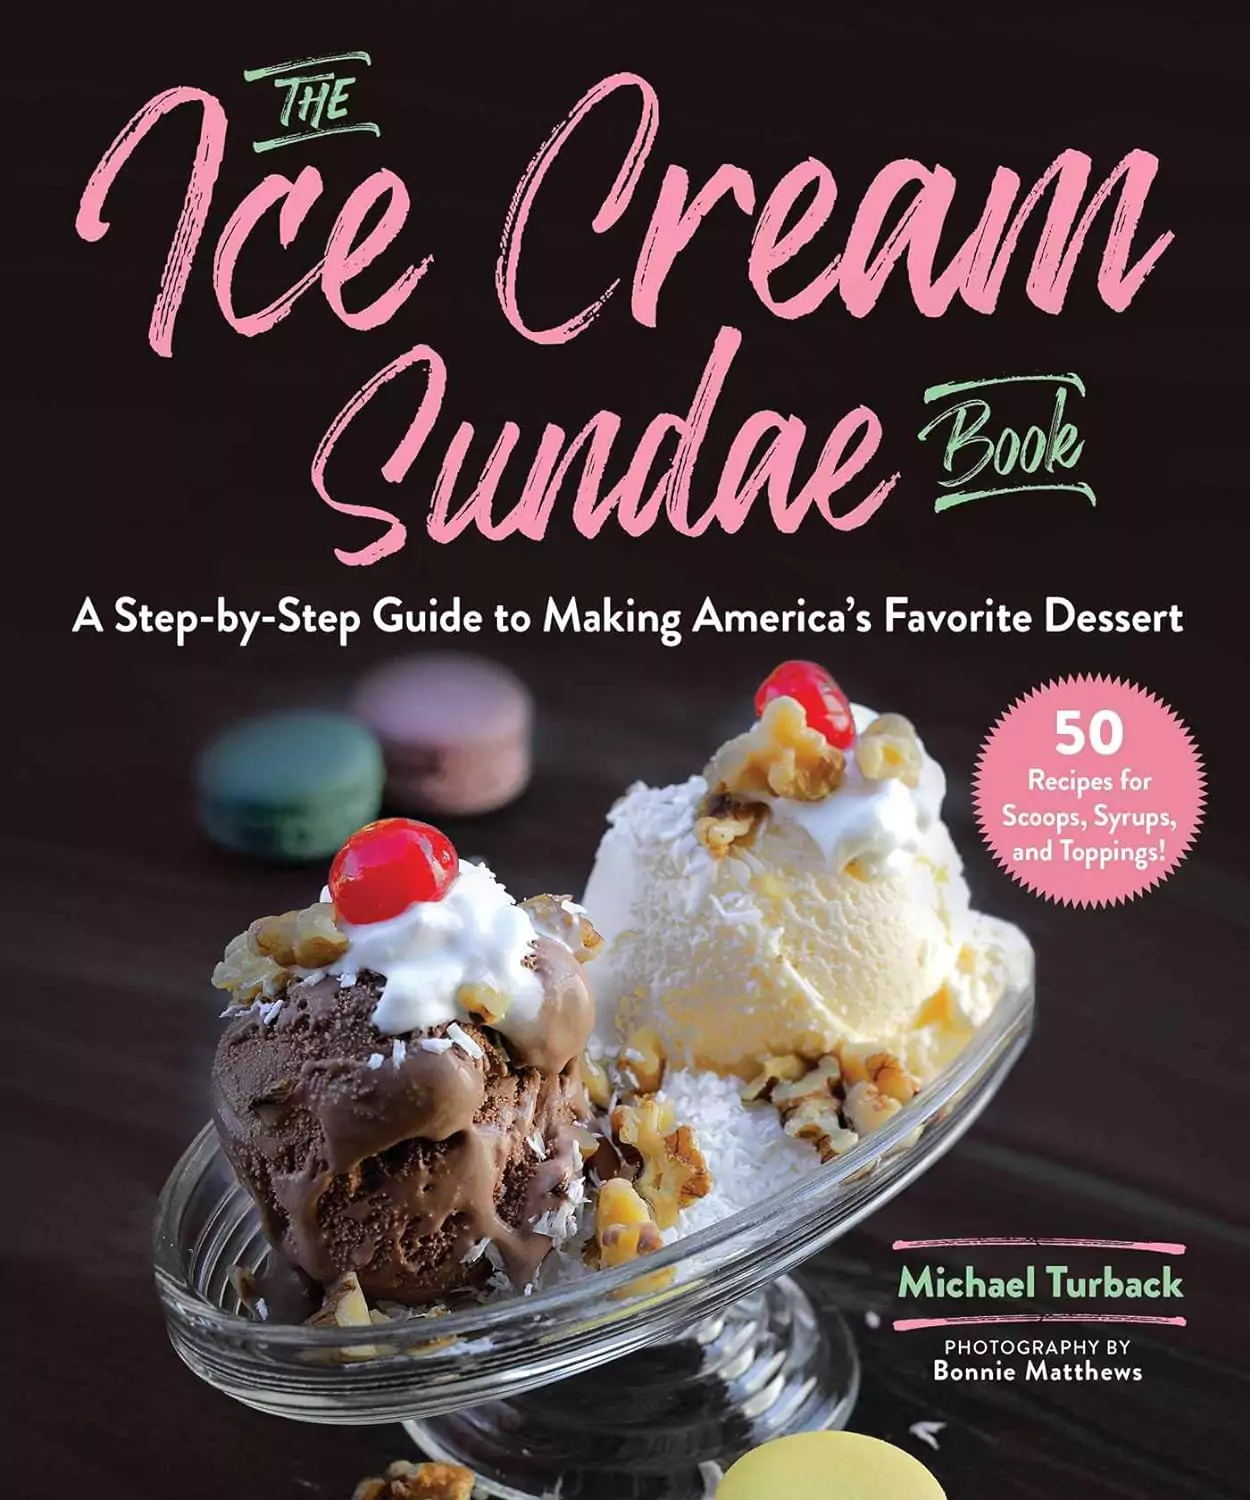 The Ice Cream Sundae Book by Michael Turback on a white background